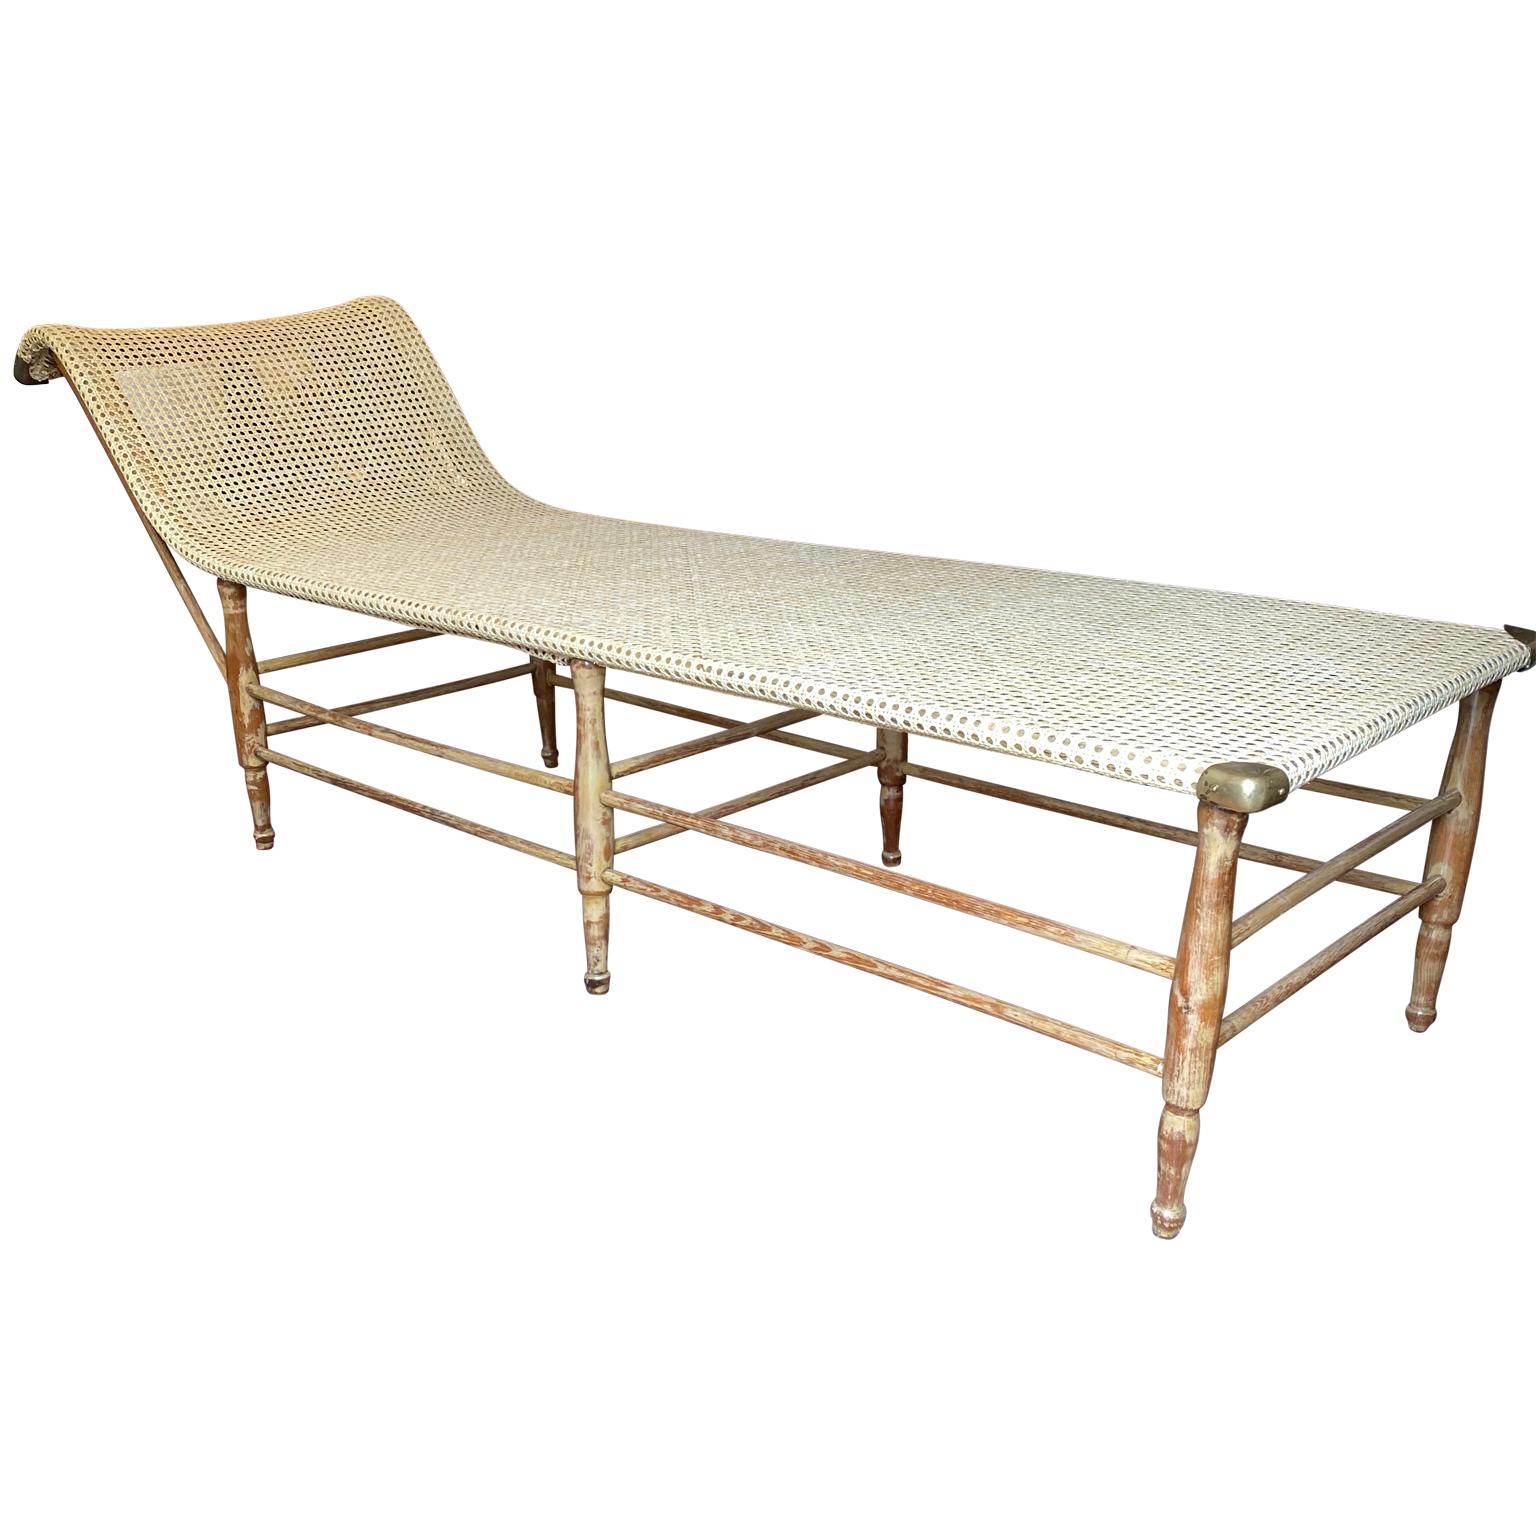 Early Mid-Century Modern caned daybed with brass hardware.

   